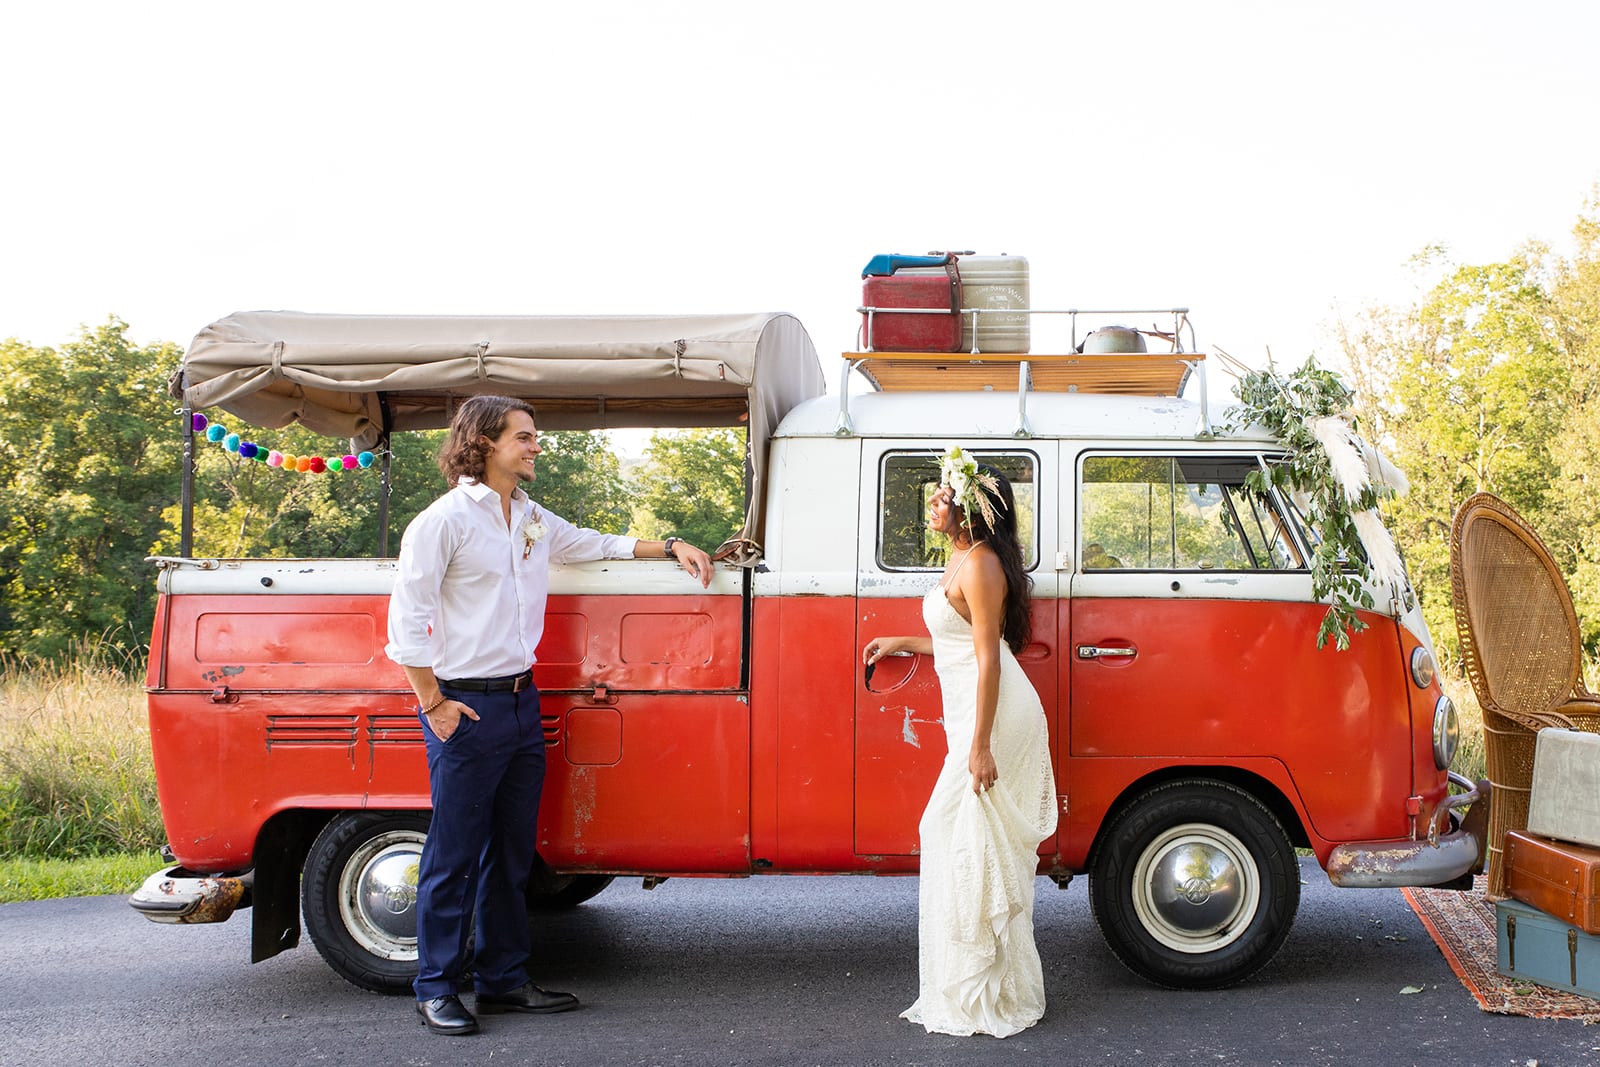 Vintage VW Truck with Bride and Groom